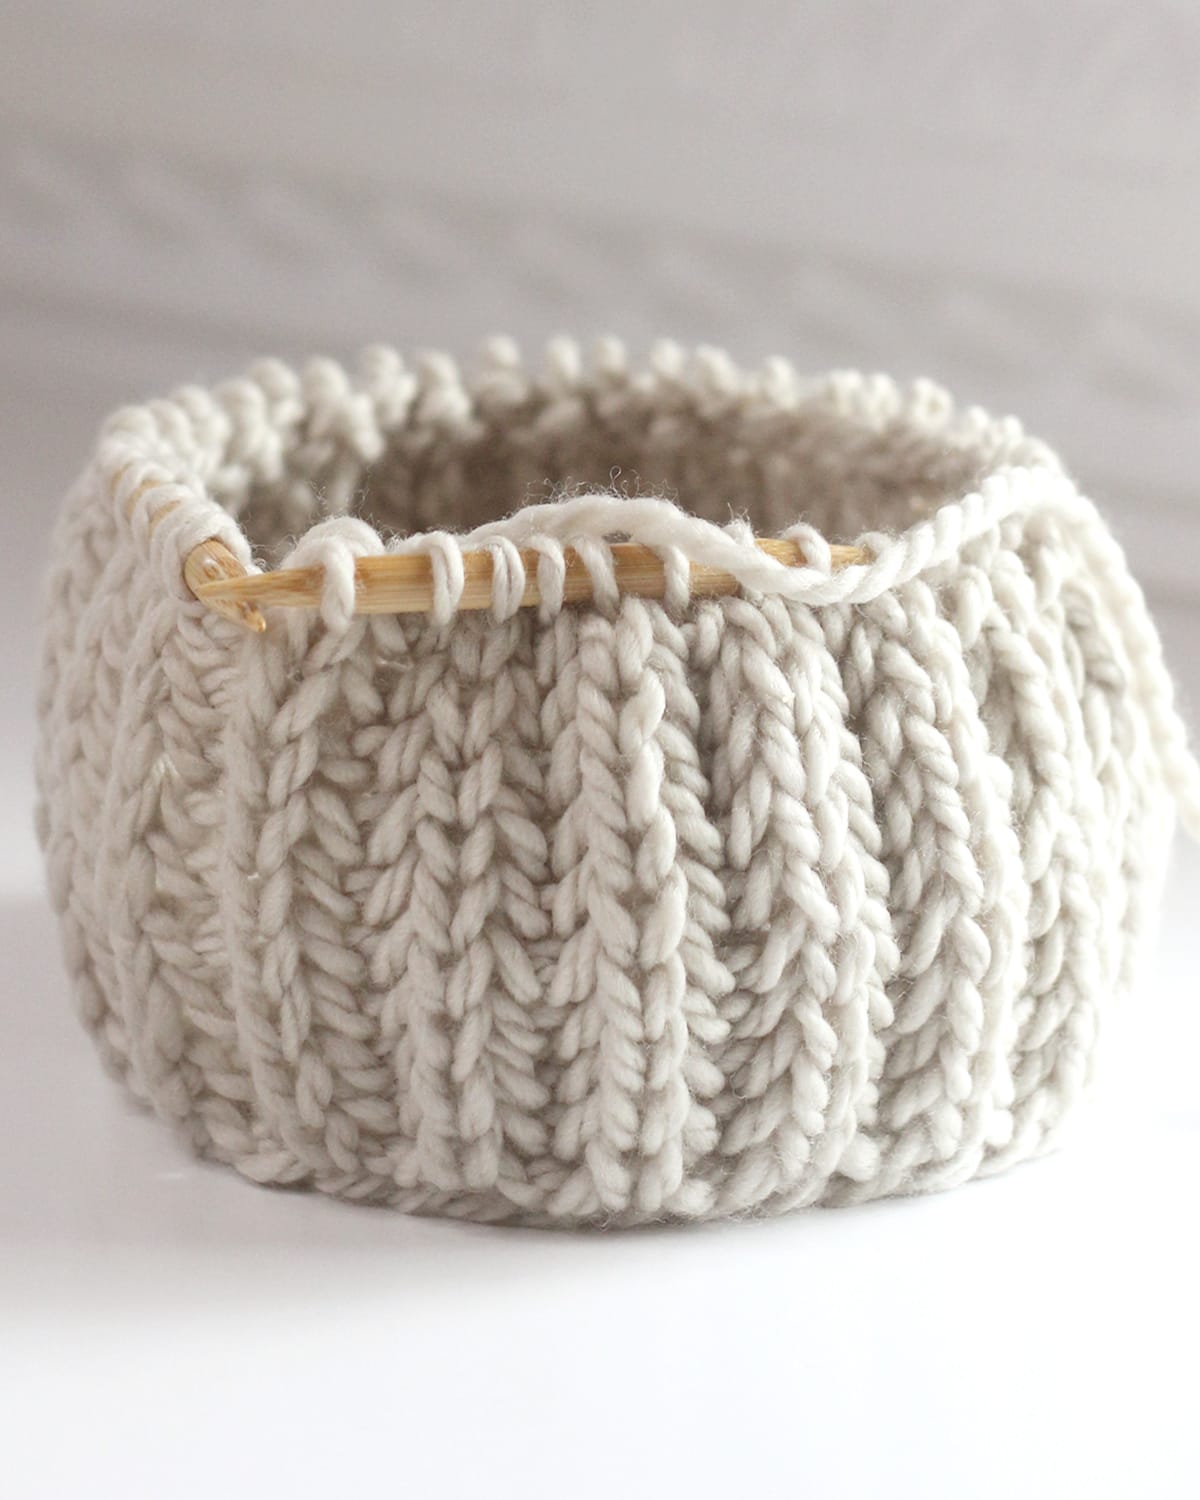 Fisherman's Rib knit stitch texture on circular wooden bamboo needles with beige colored yarn.